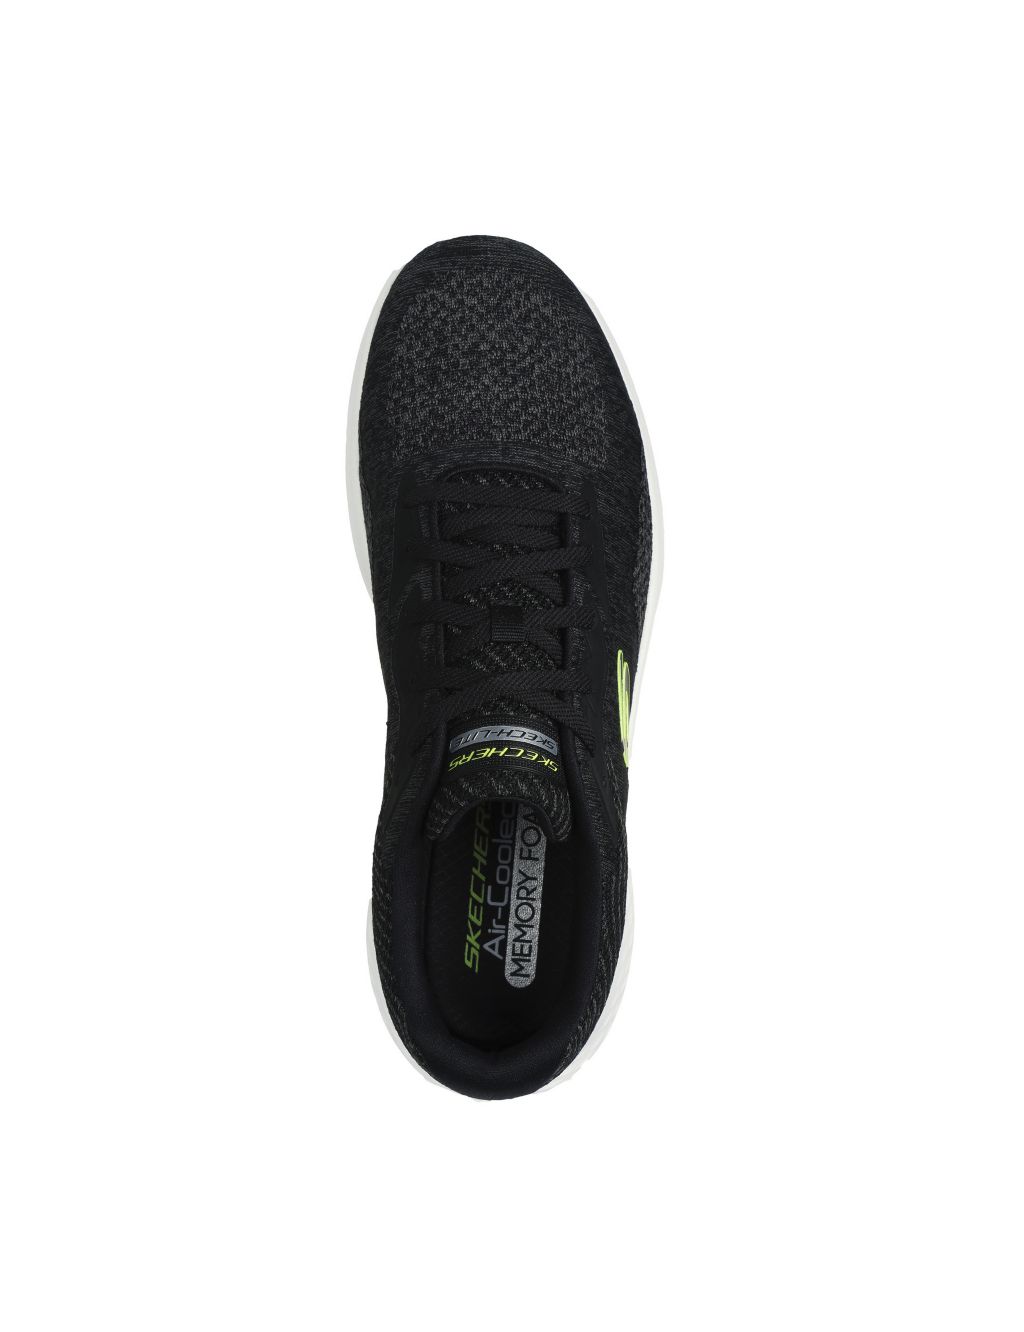 Skech-Lite Pro Faregrove Lace Up Trainers image 3